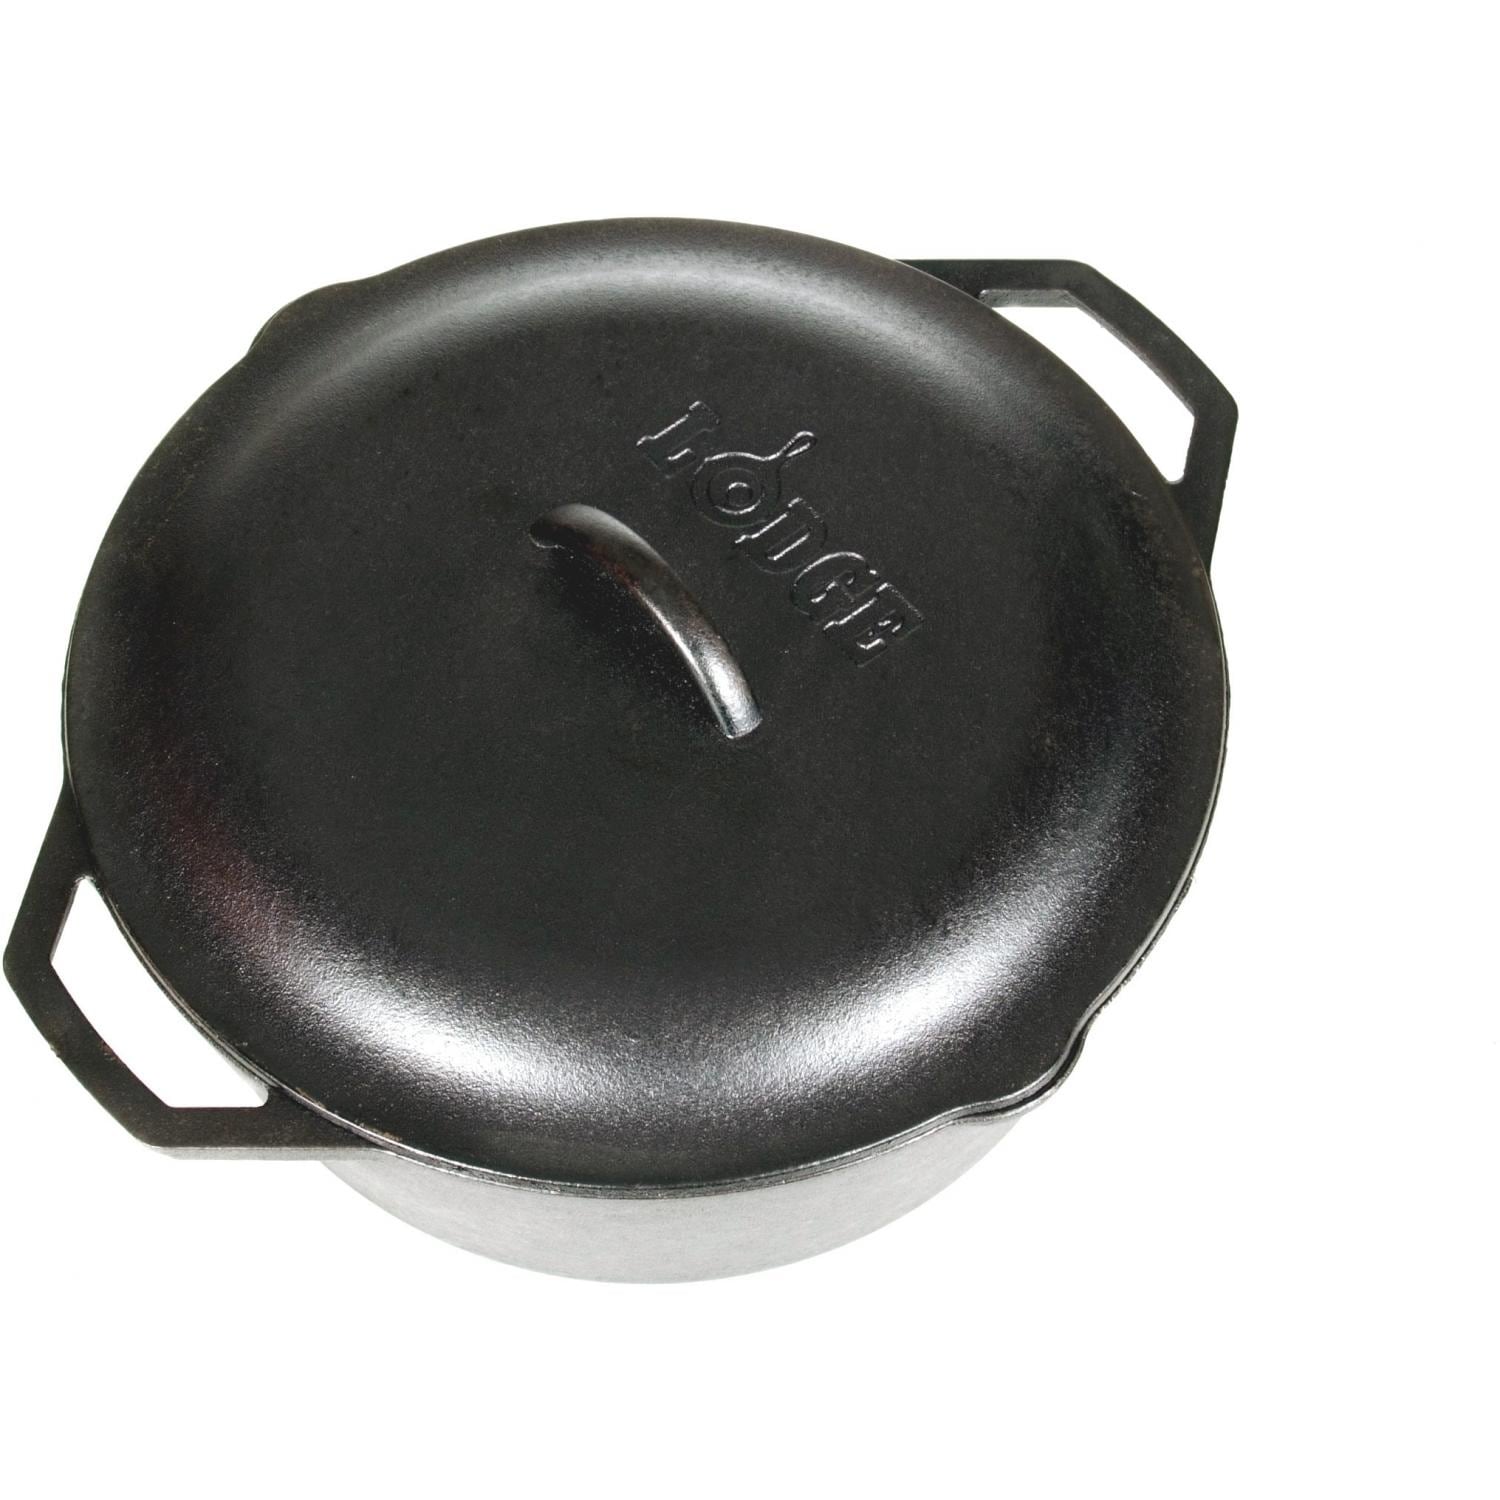 https://ak1.ostkcdn.com/images/products/is/images/direct/6ea81d6cf2e3f353fadfc1d9f912e9f2ea00c271/Lodge-L10DOL3-Dutch-Oven-With-Loop-Handles-And-Iron-Cover%2C-7-Quart.jpg